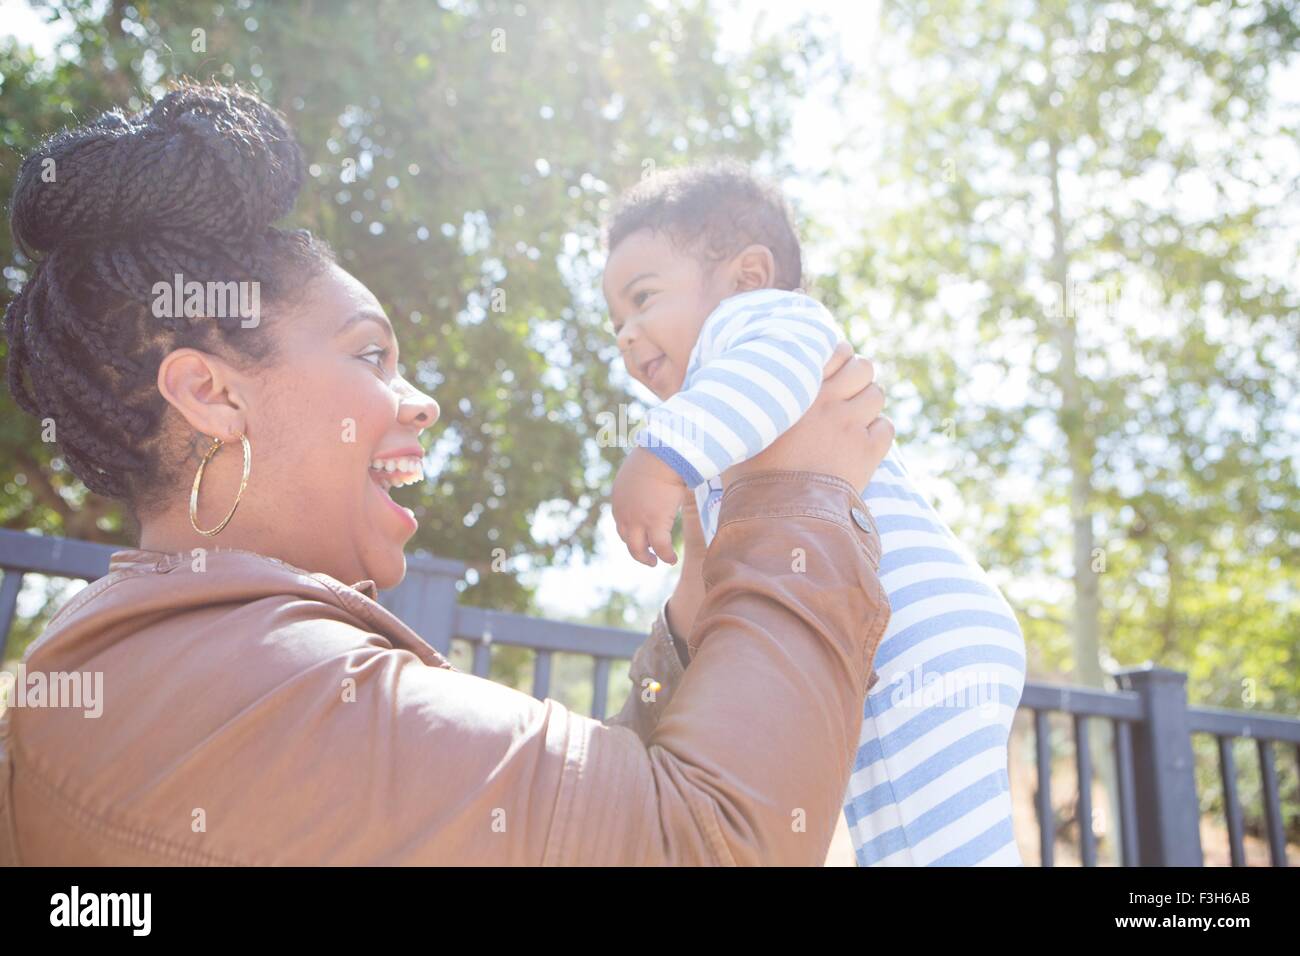 Mother holding up baby boy in park Stock Photo